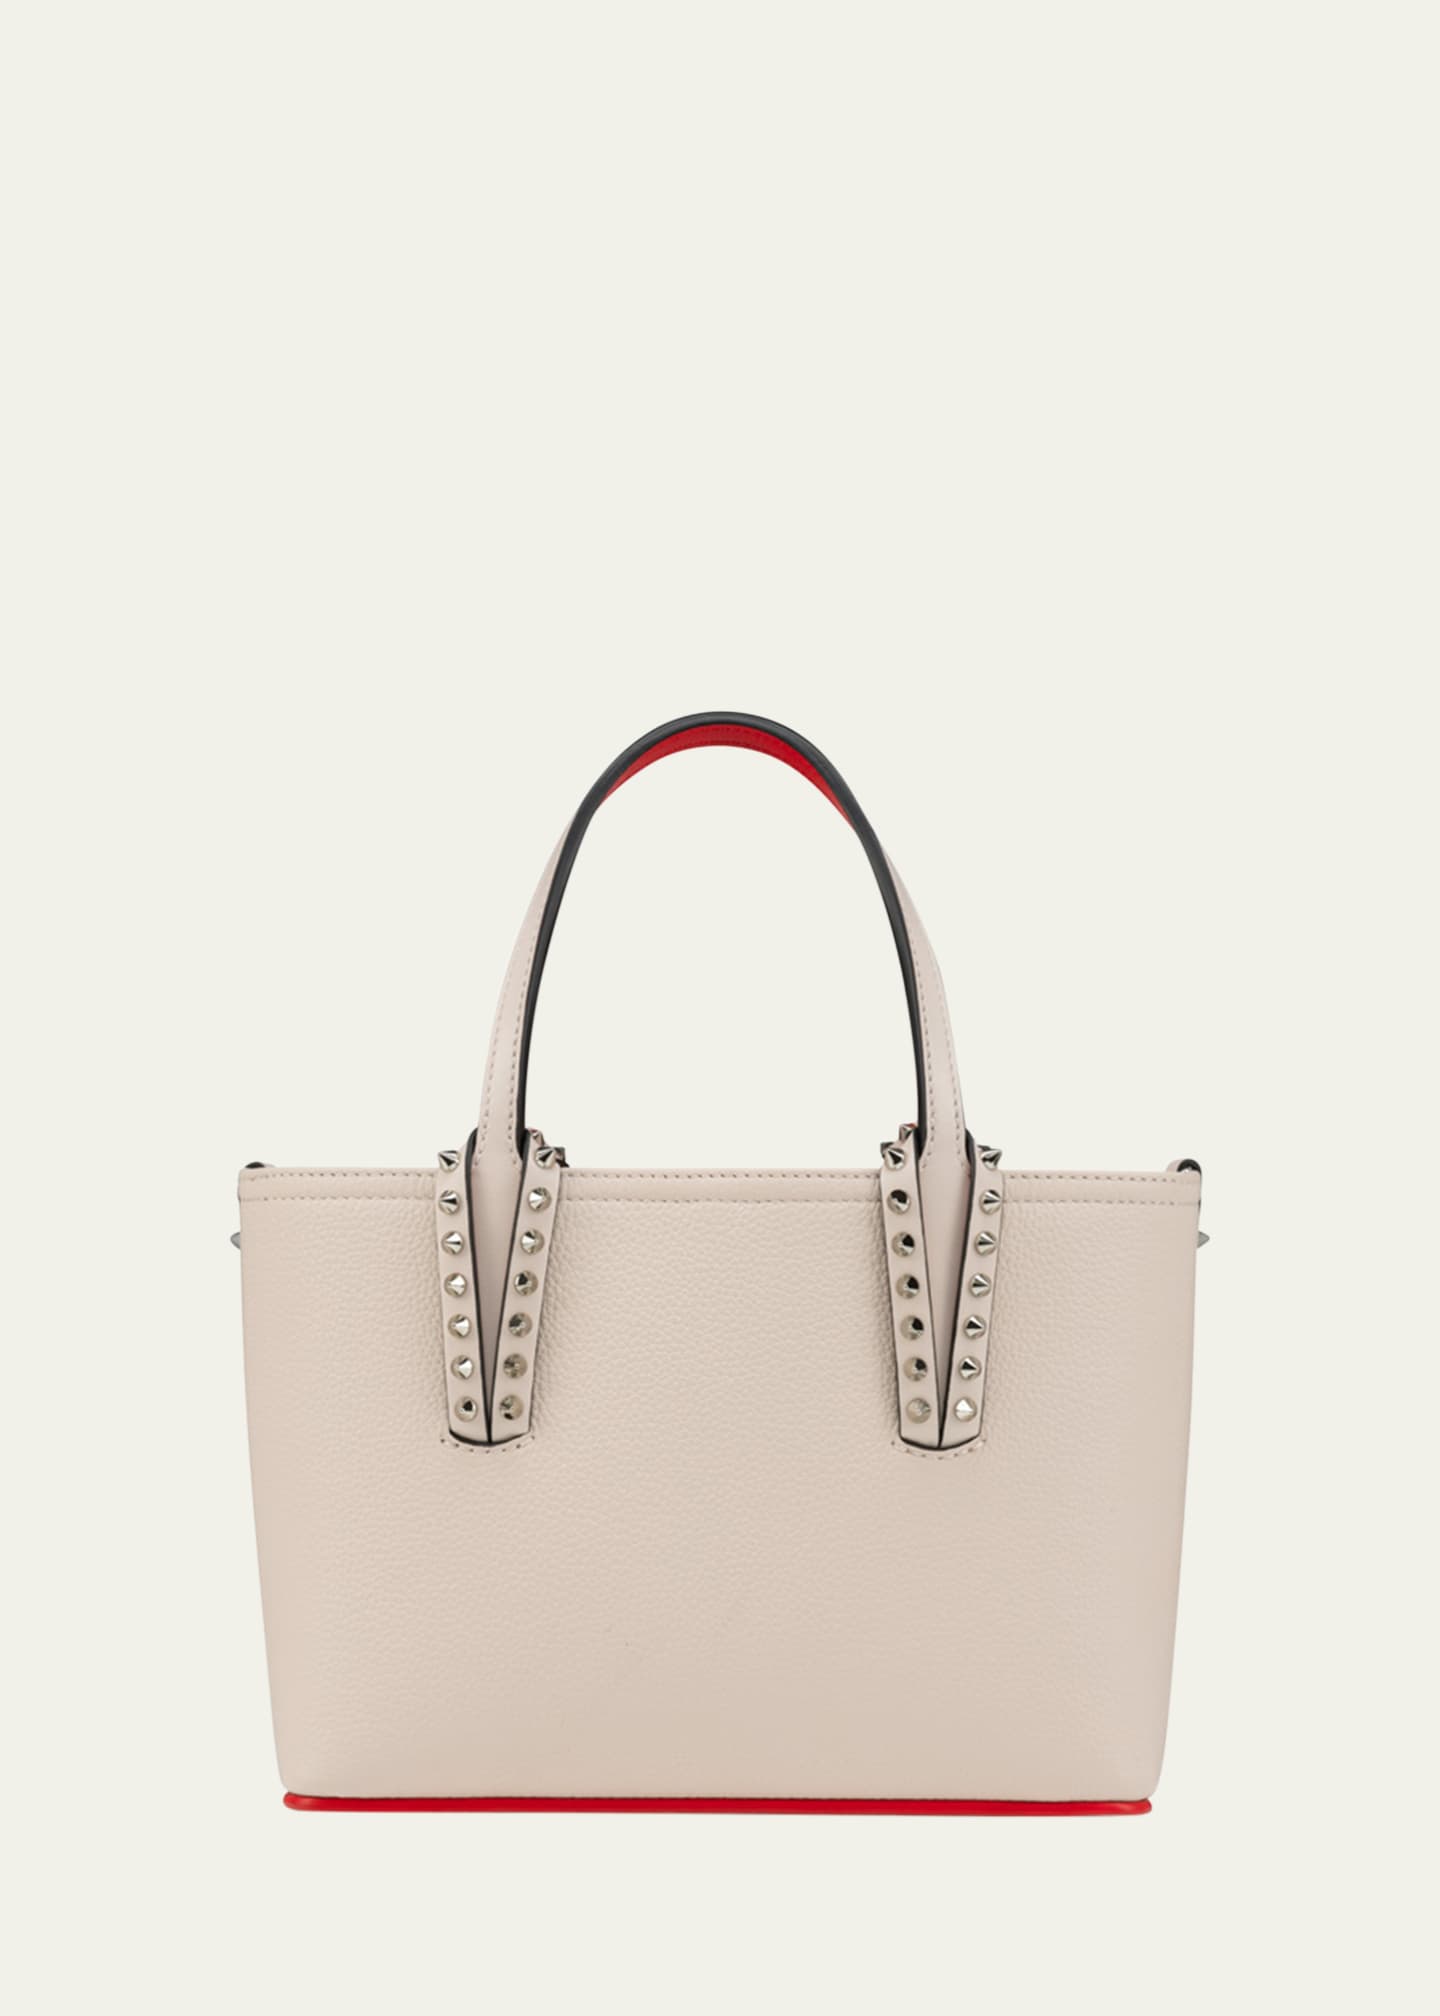 CHRISTIAN LOUBOUTIN: Cabata leather bag with spikes - White